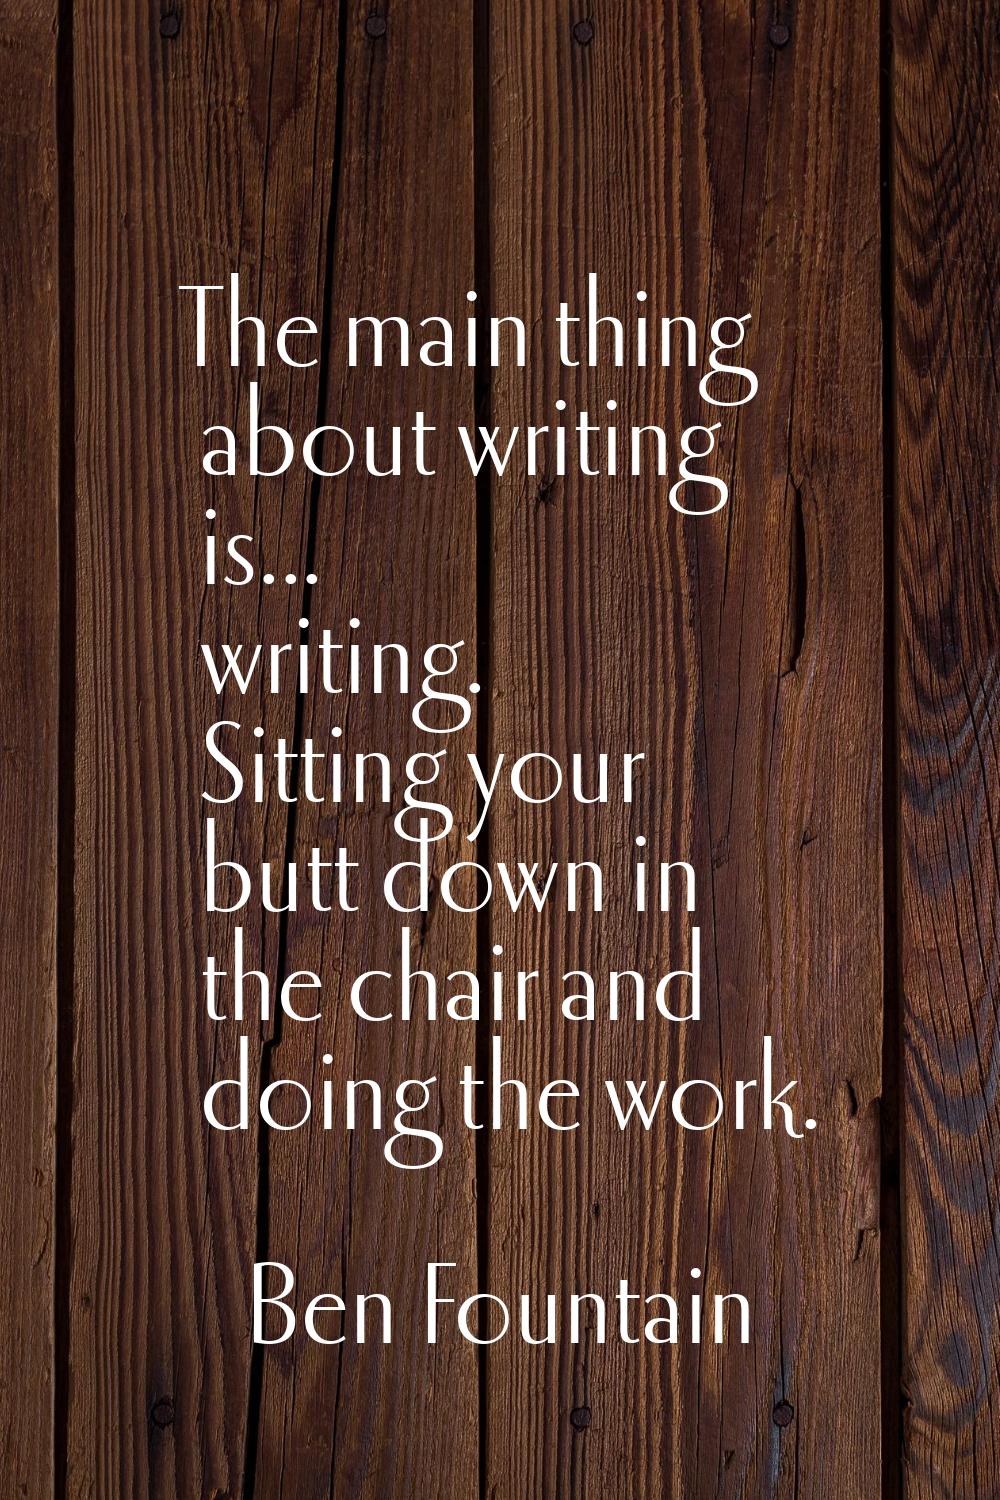 The main thing about writing is... writing. Sitting your butt down in the chair and doing the work.